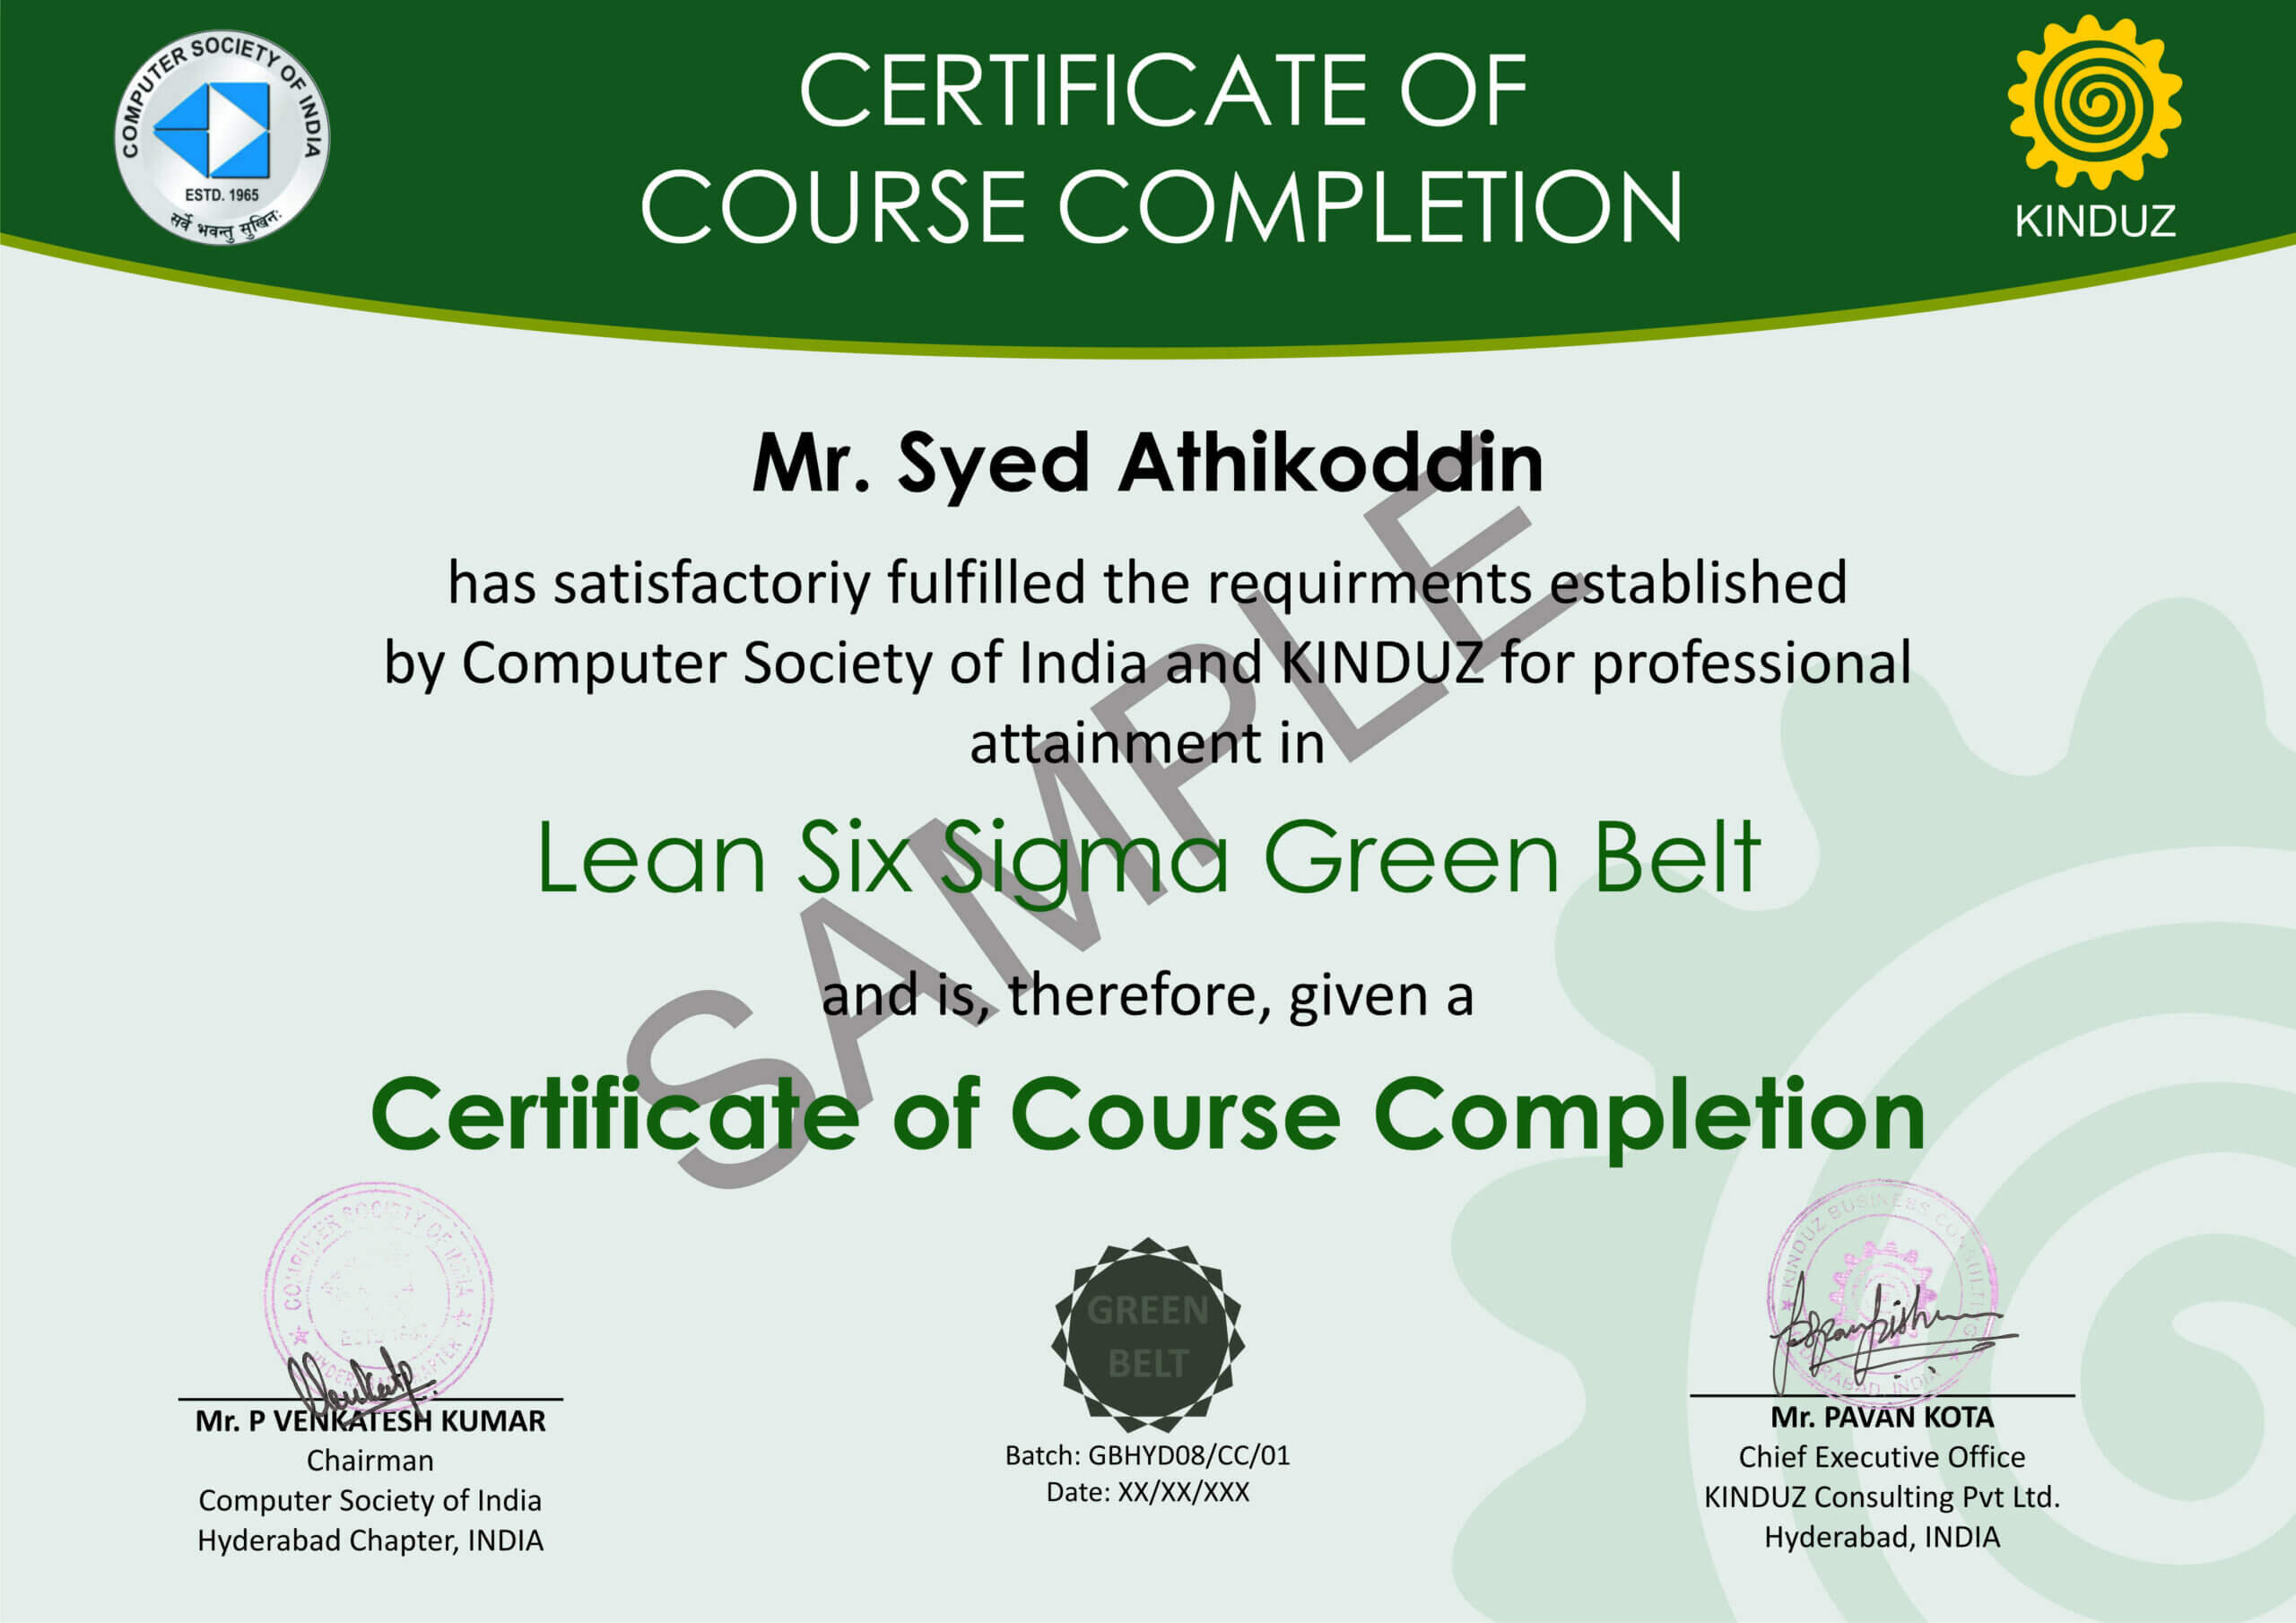 Sample Certificates - Lean Six Sigma India Pertaining To Green Belt Certificate Template